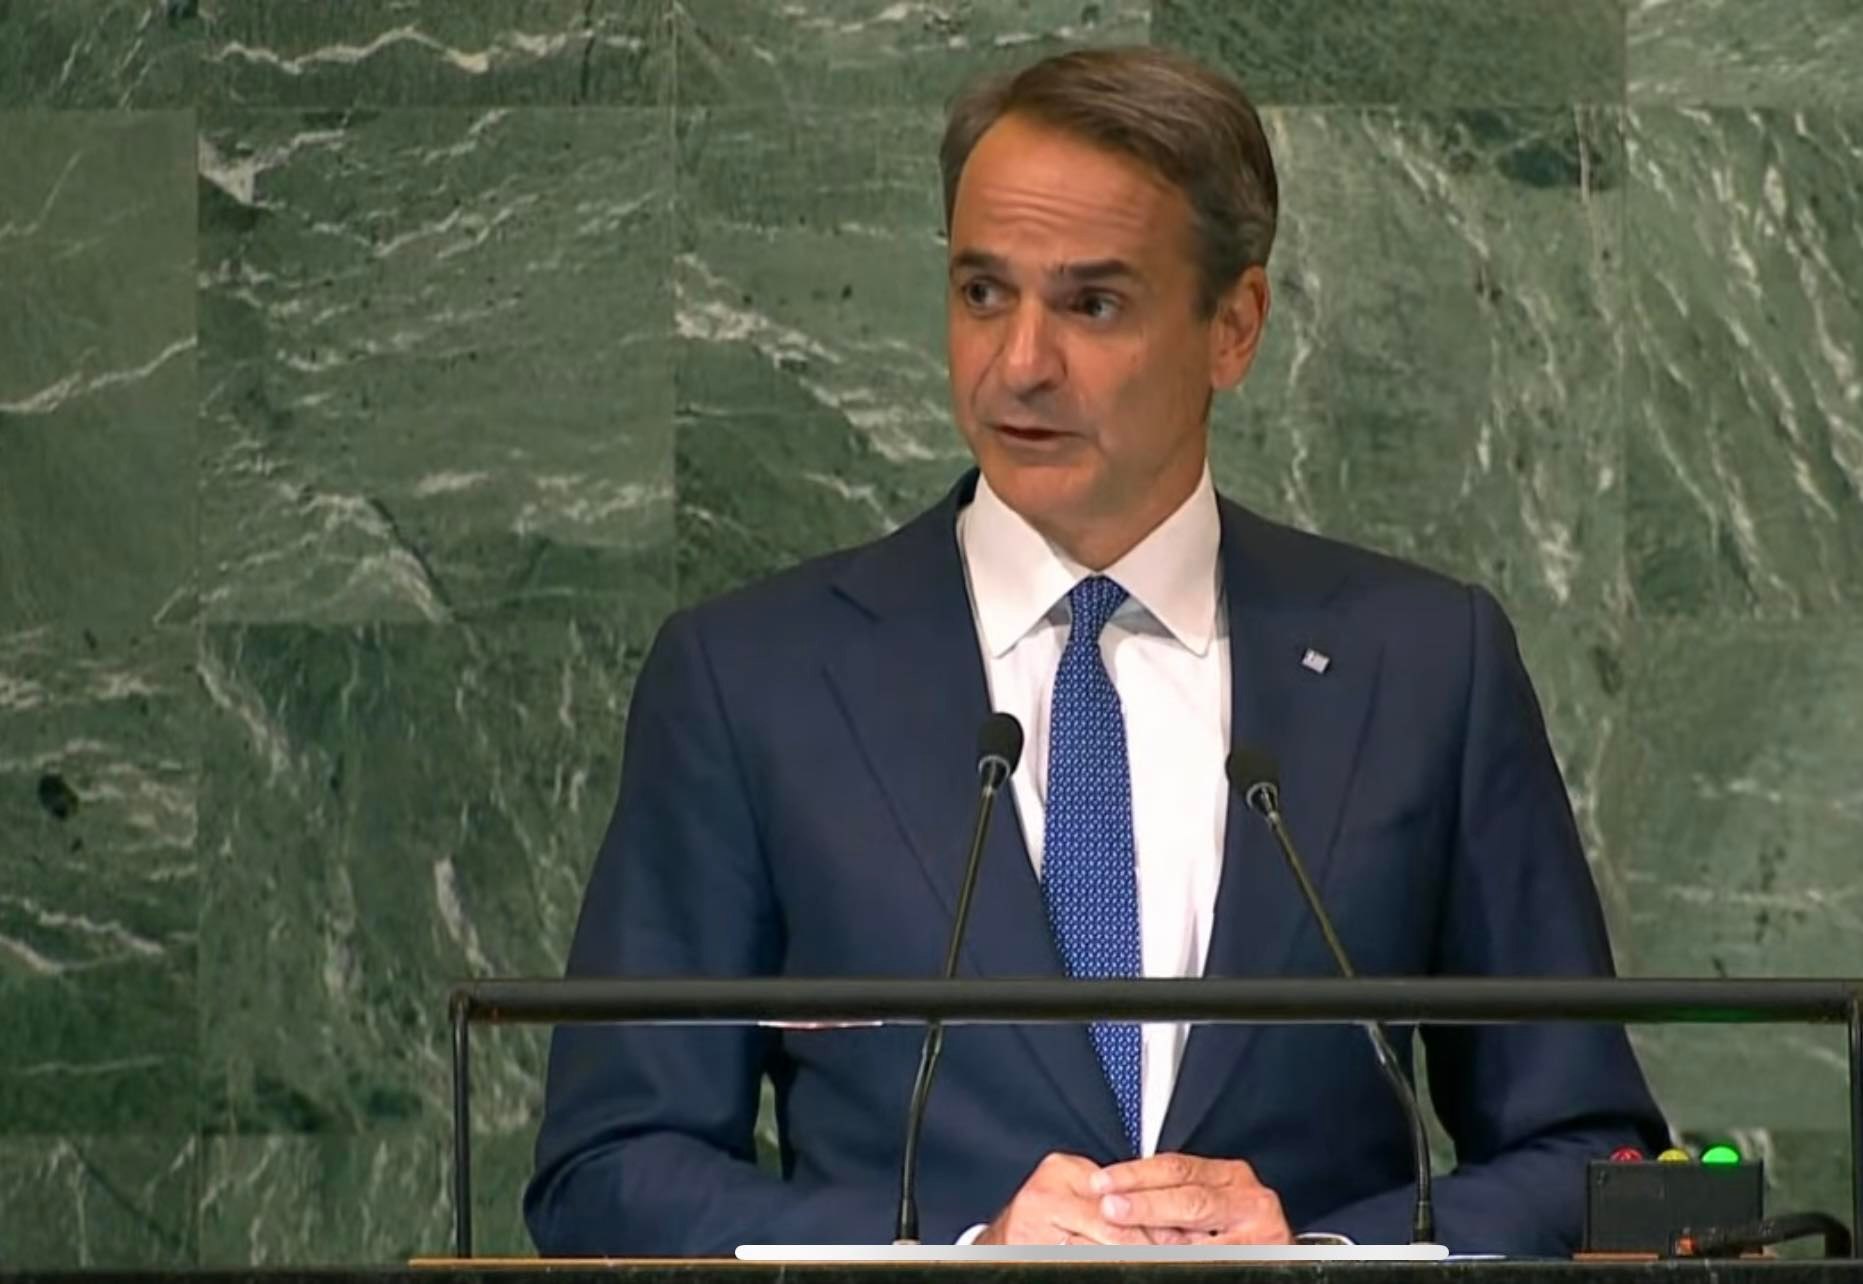 Greek PM Mitsotakis at UN General Assembly: : Russia's Invasion Must Not Succeed